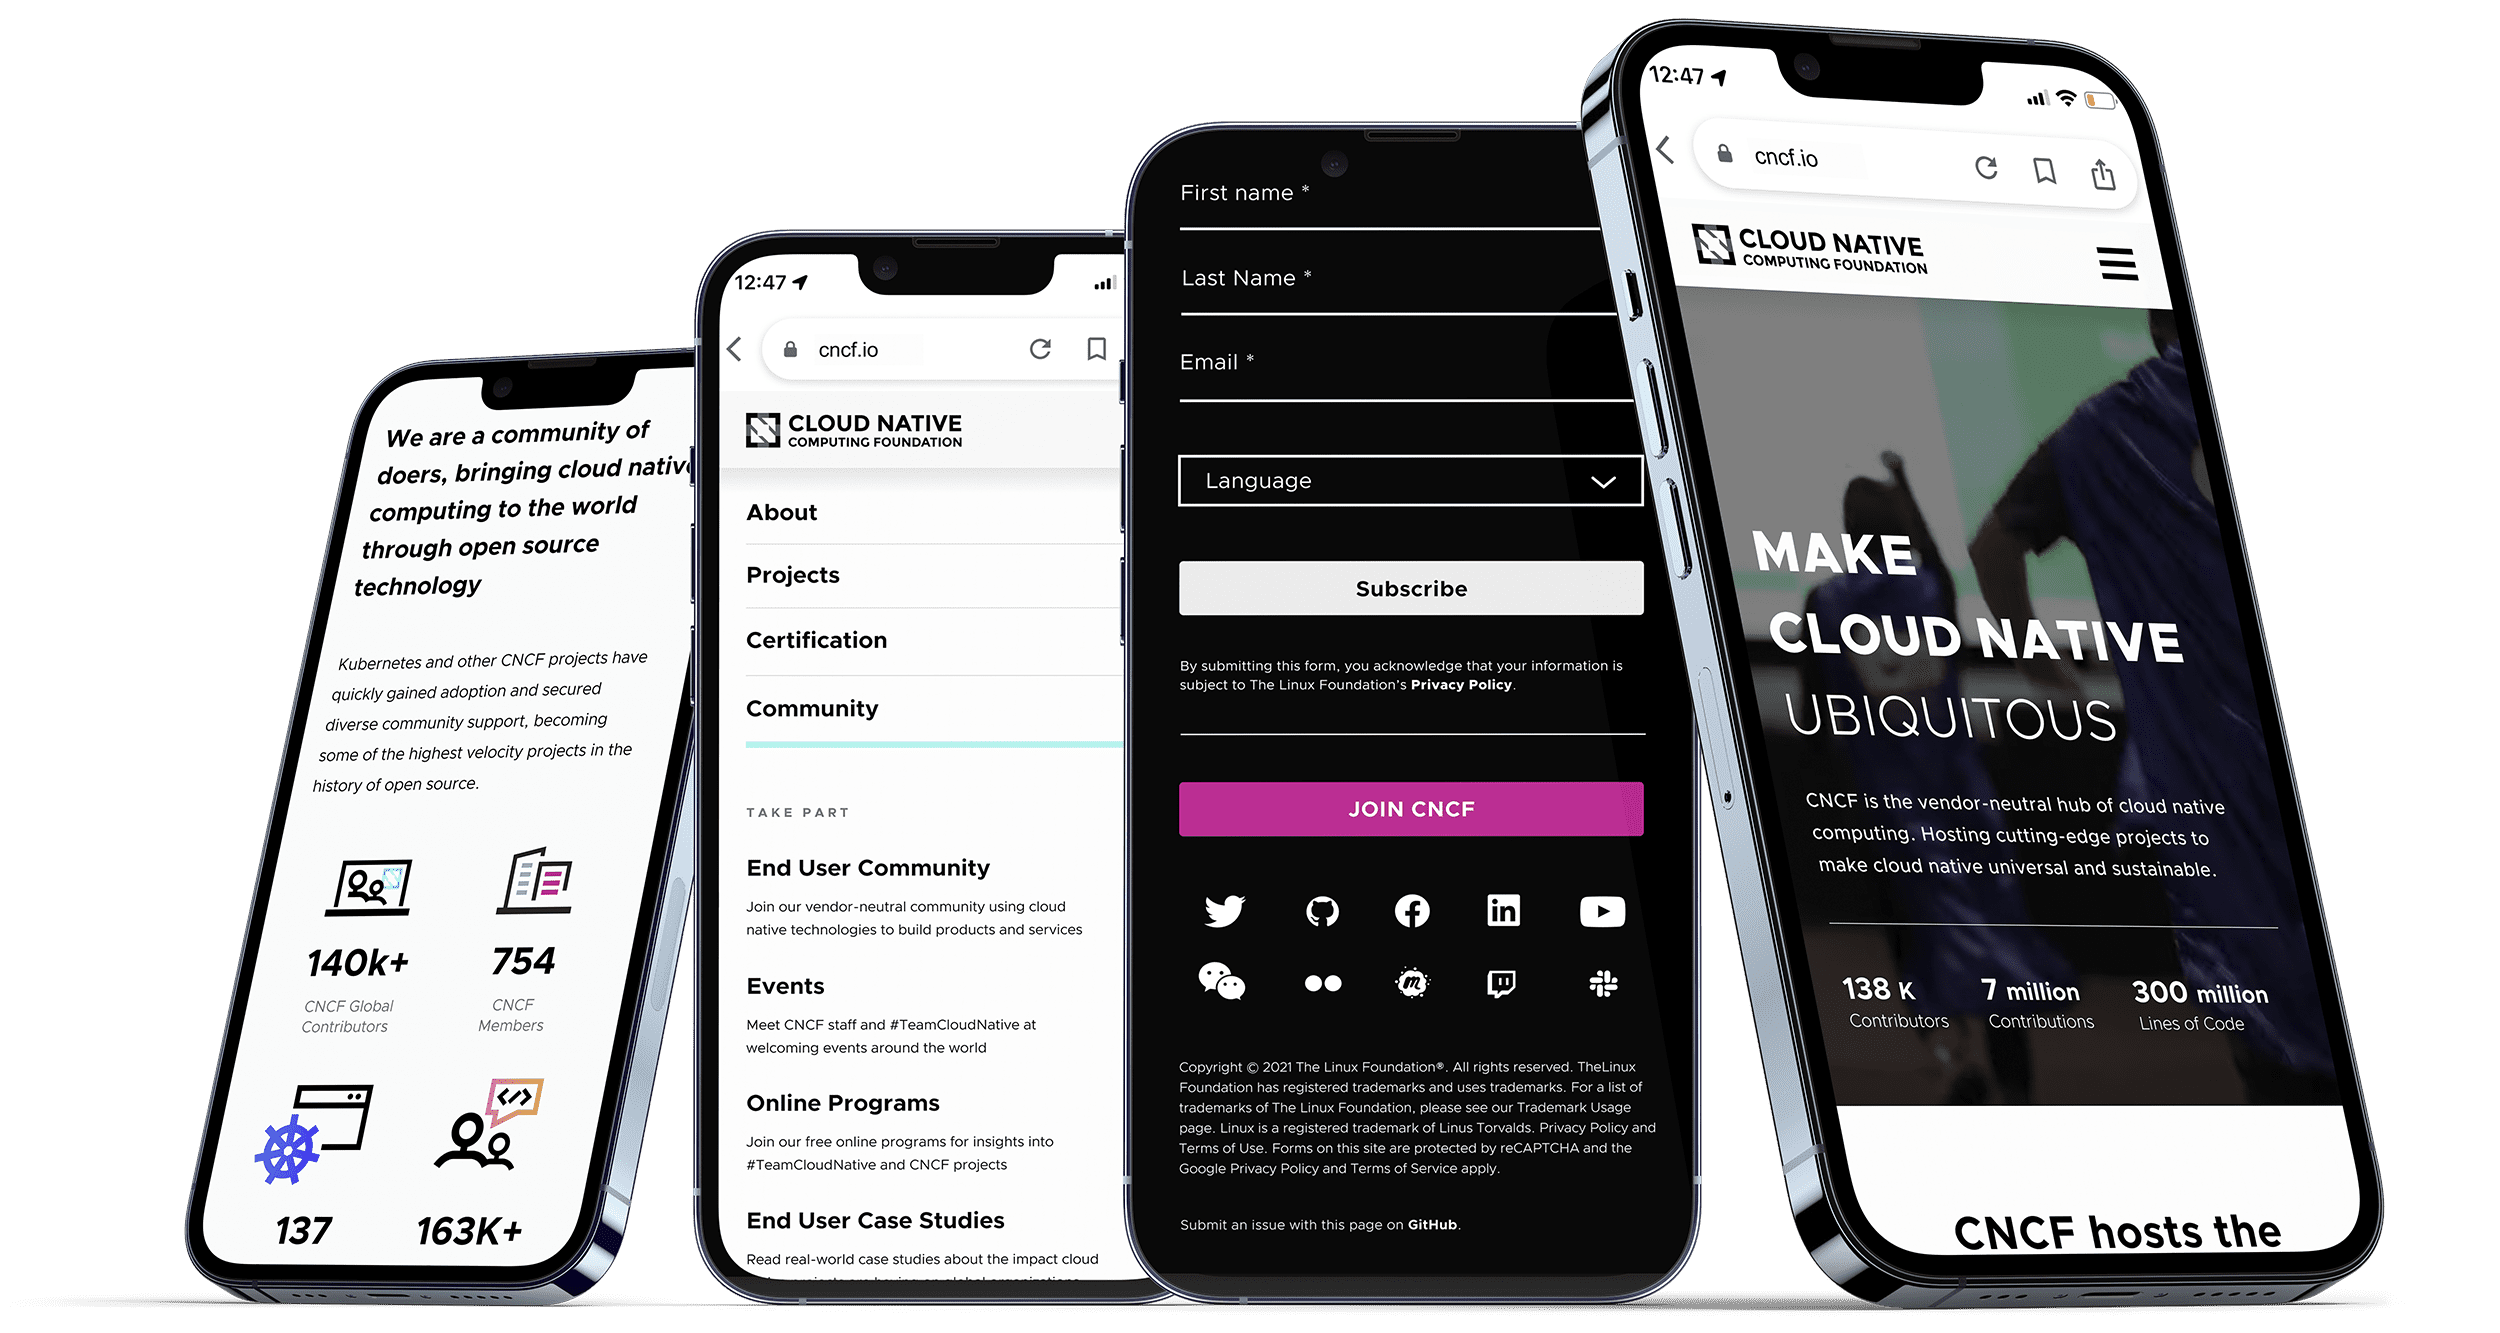 iPhones showing the CNCF.io site